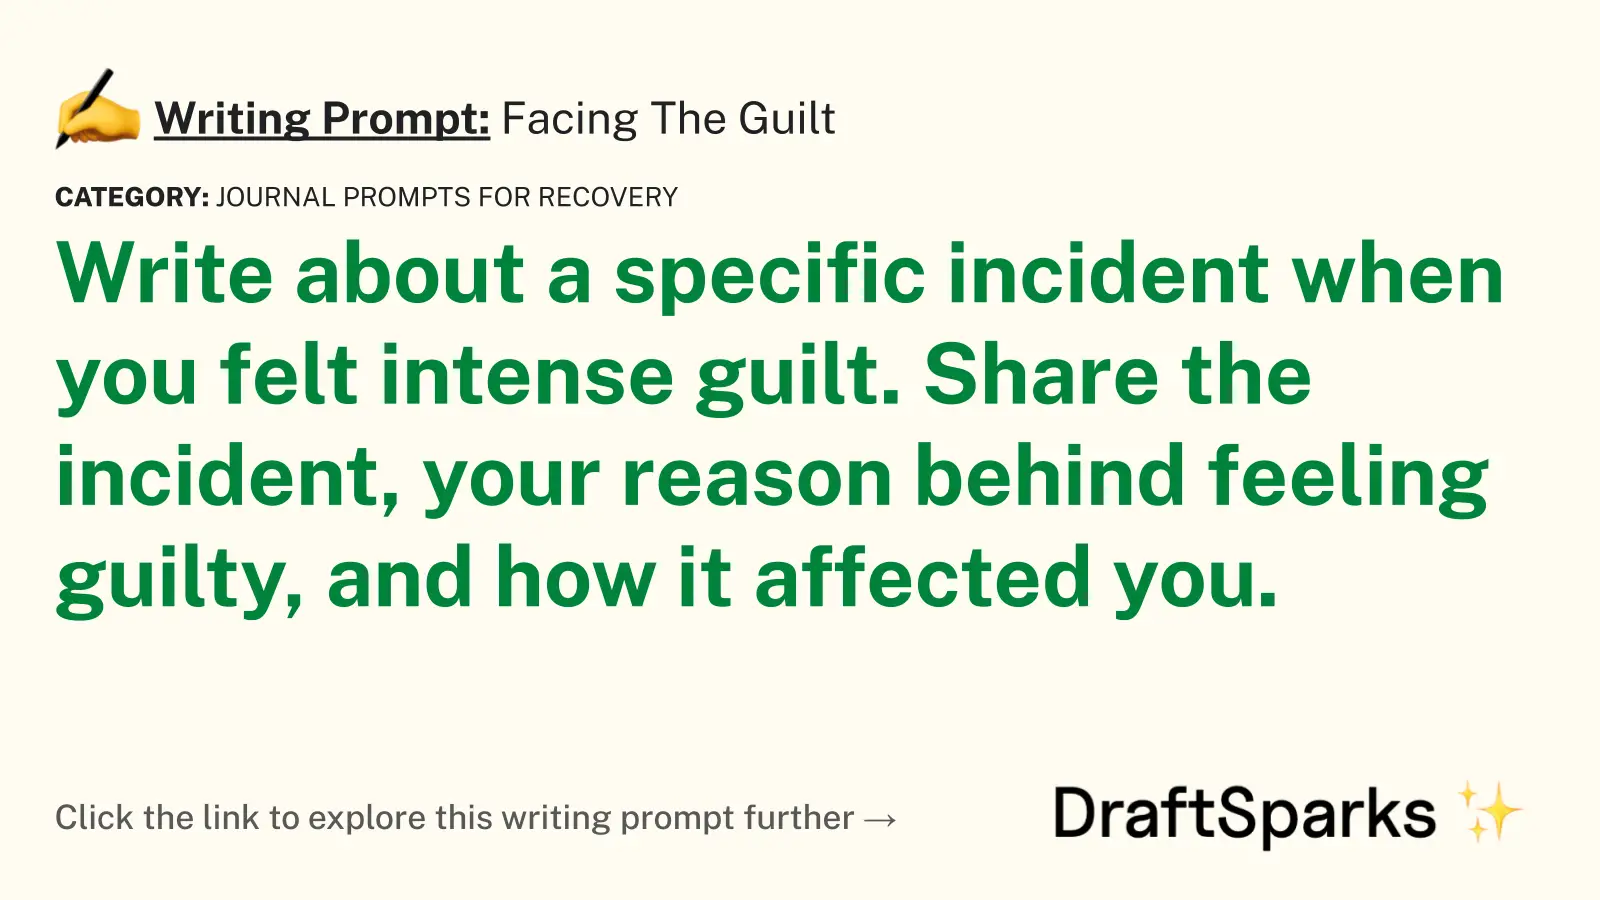 Facing The Guilt